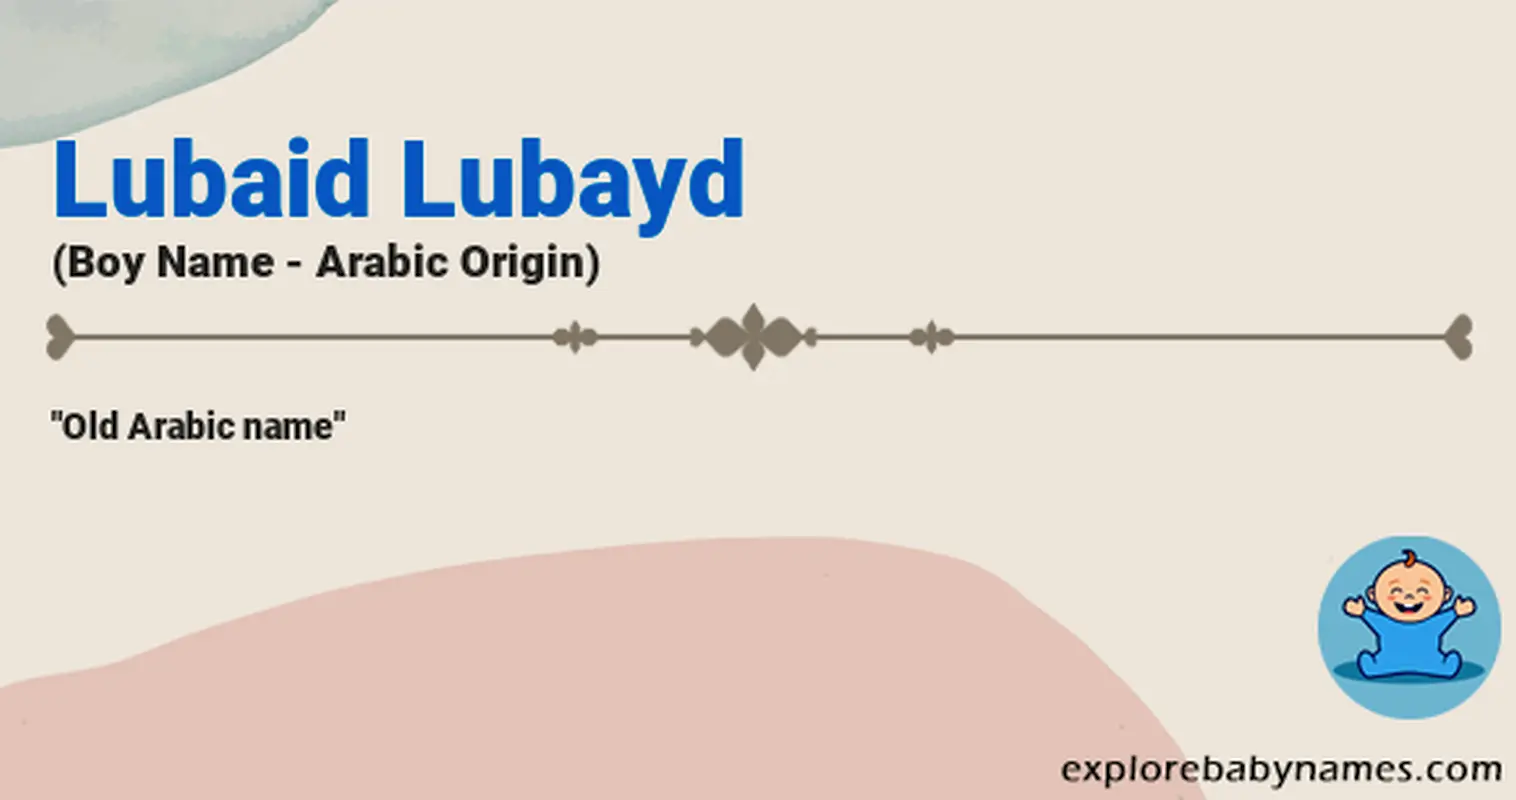 Meaning of Lubaid Lubayd